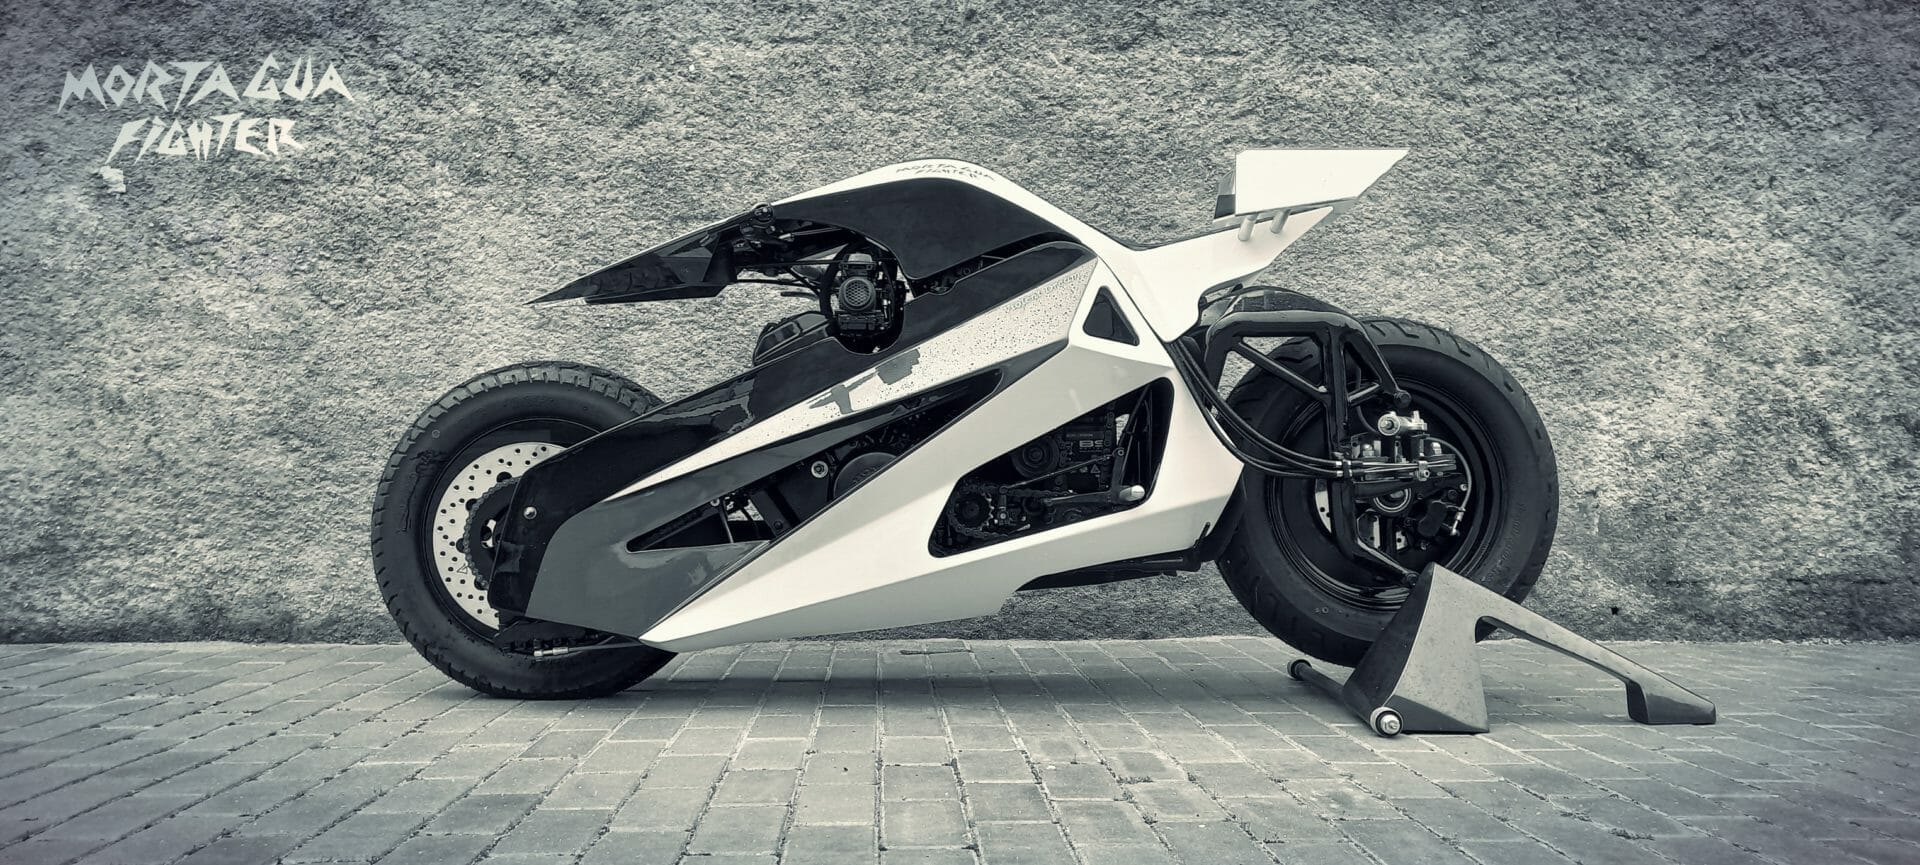 Custombike extrem – Mortagua Fighter 10 - MOTORCYCLES.NEWS